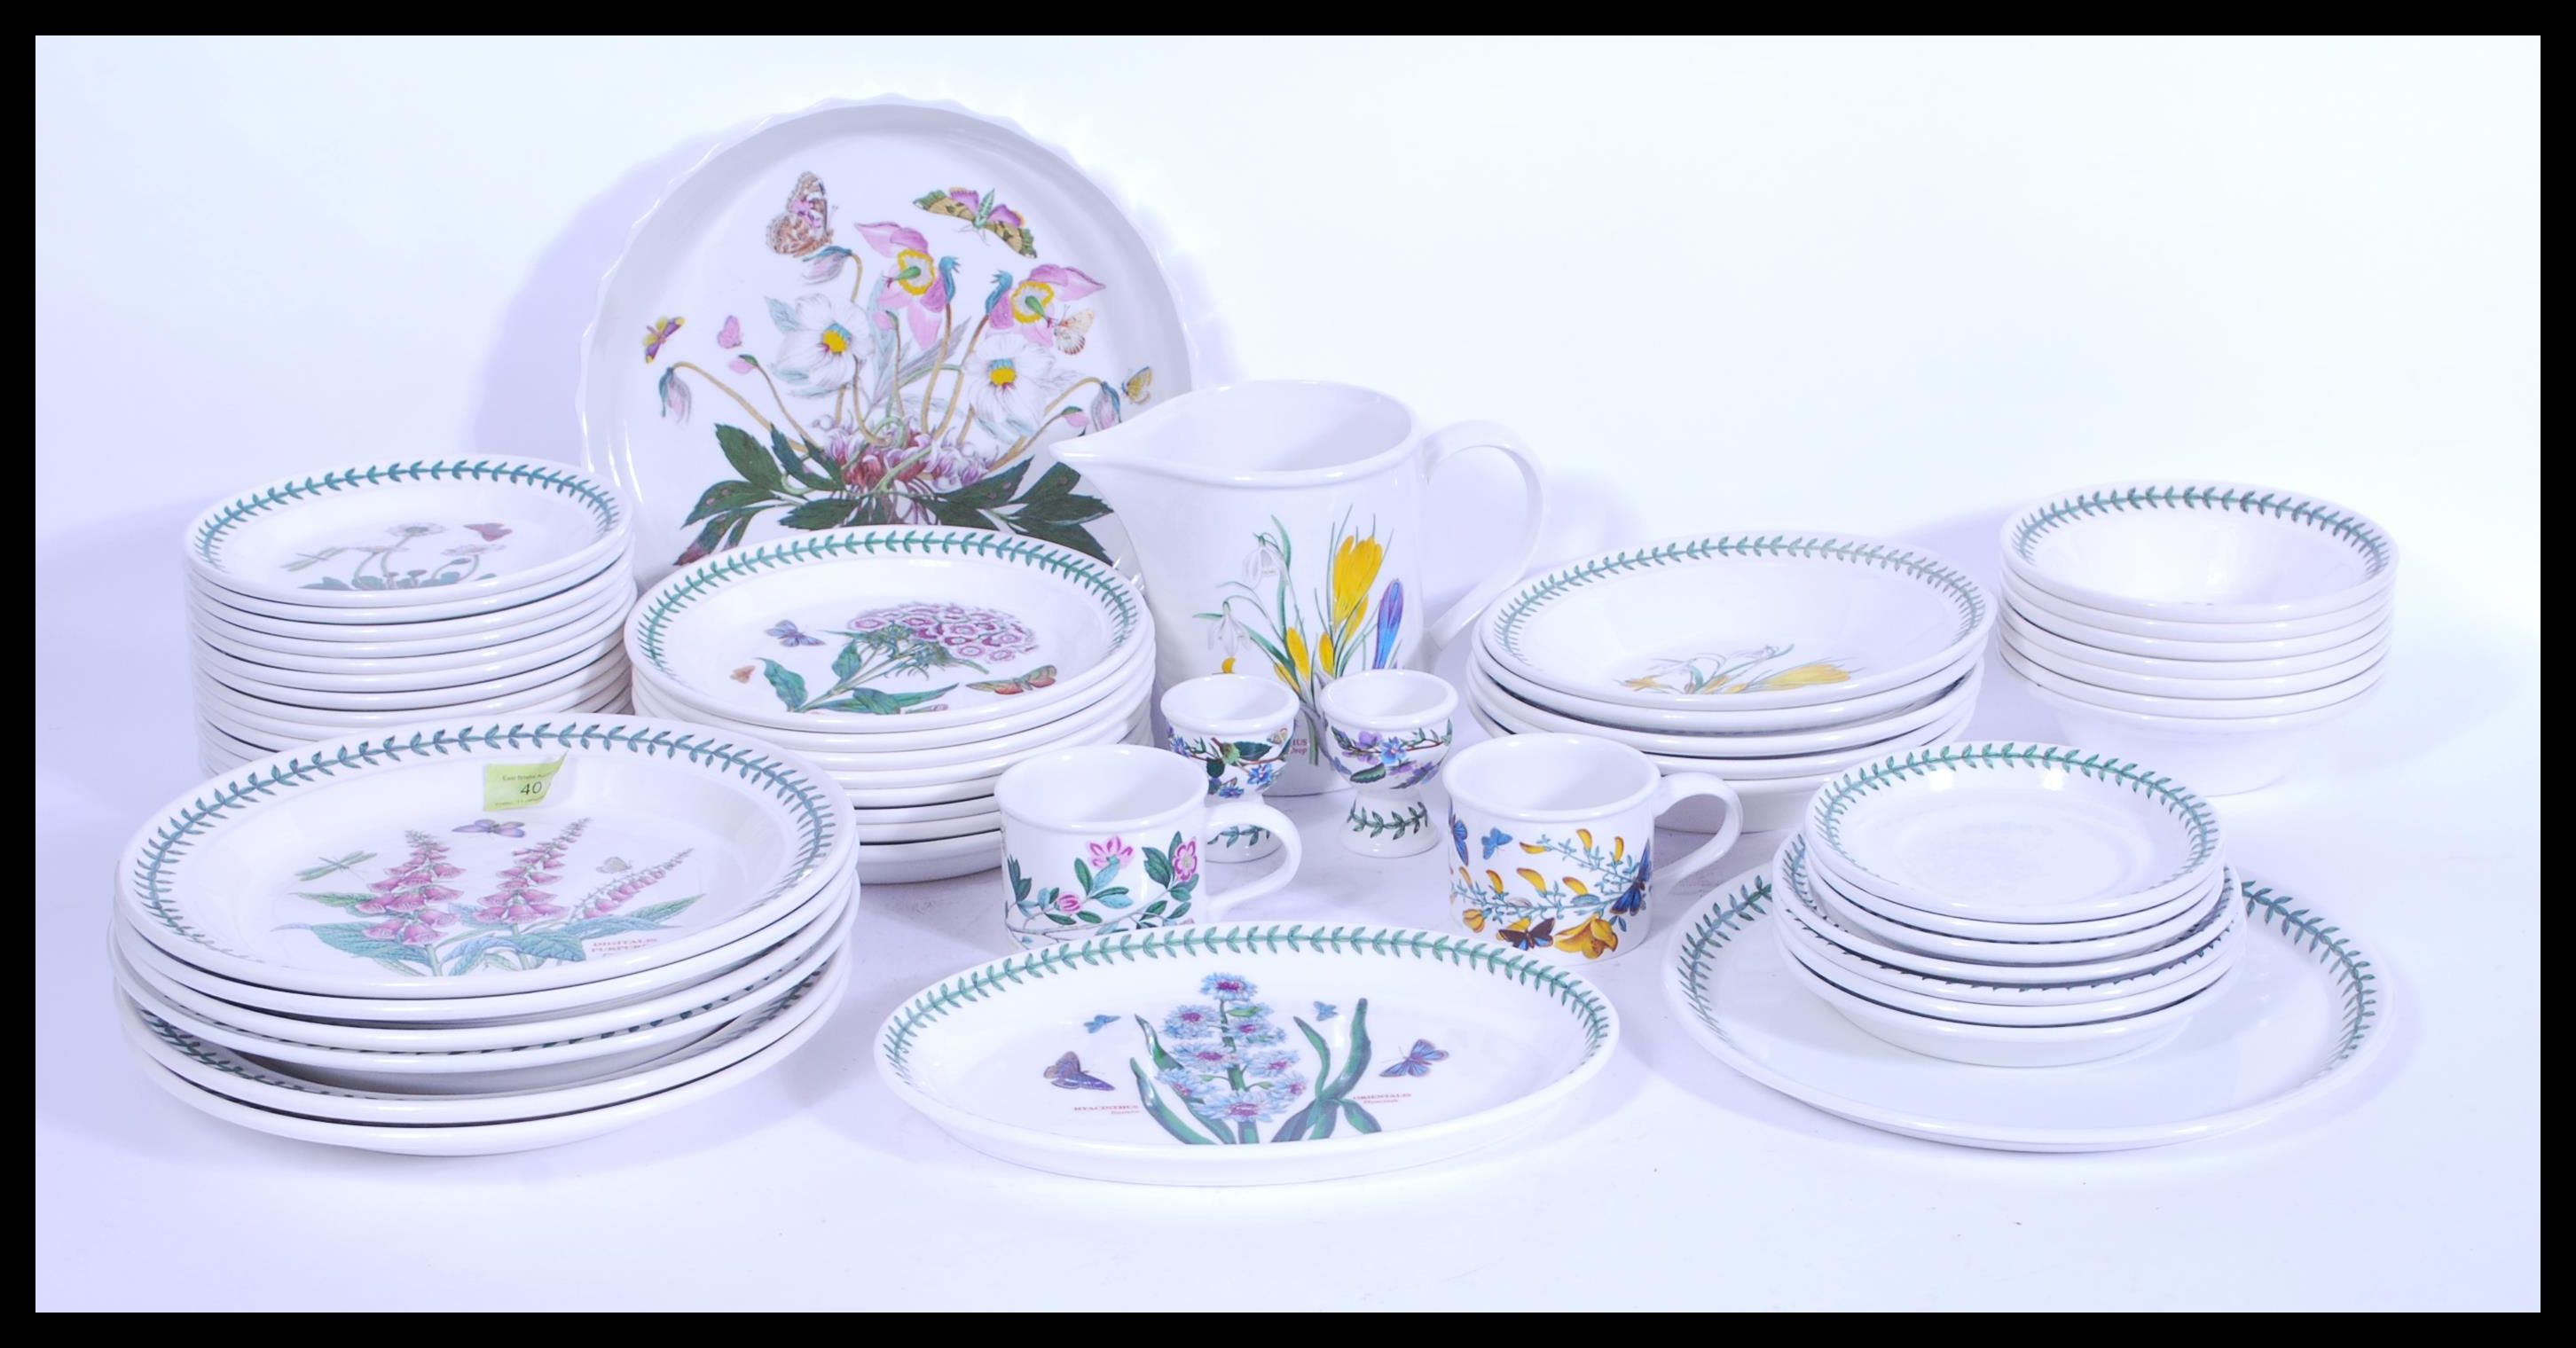 A collection of Portmeirion botanic garden table wares, to include water jug, tray, pie dish, two